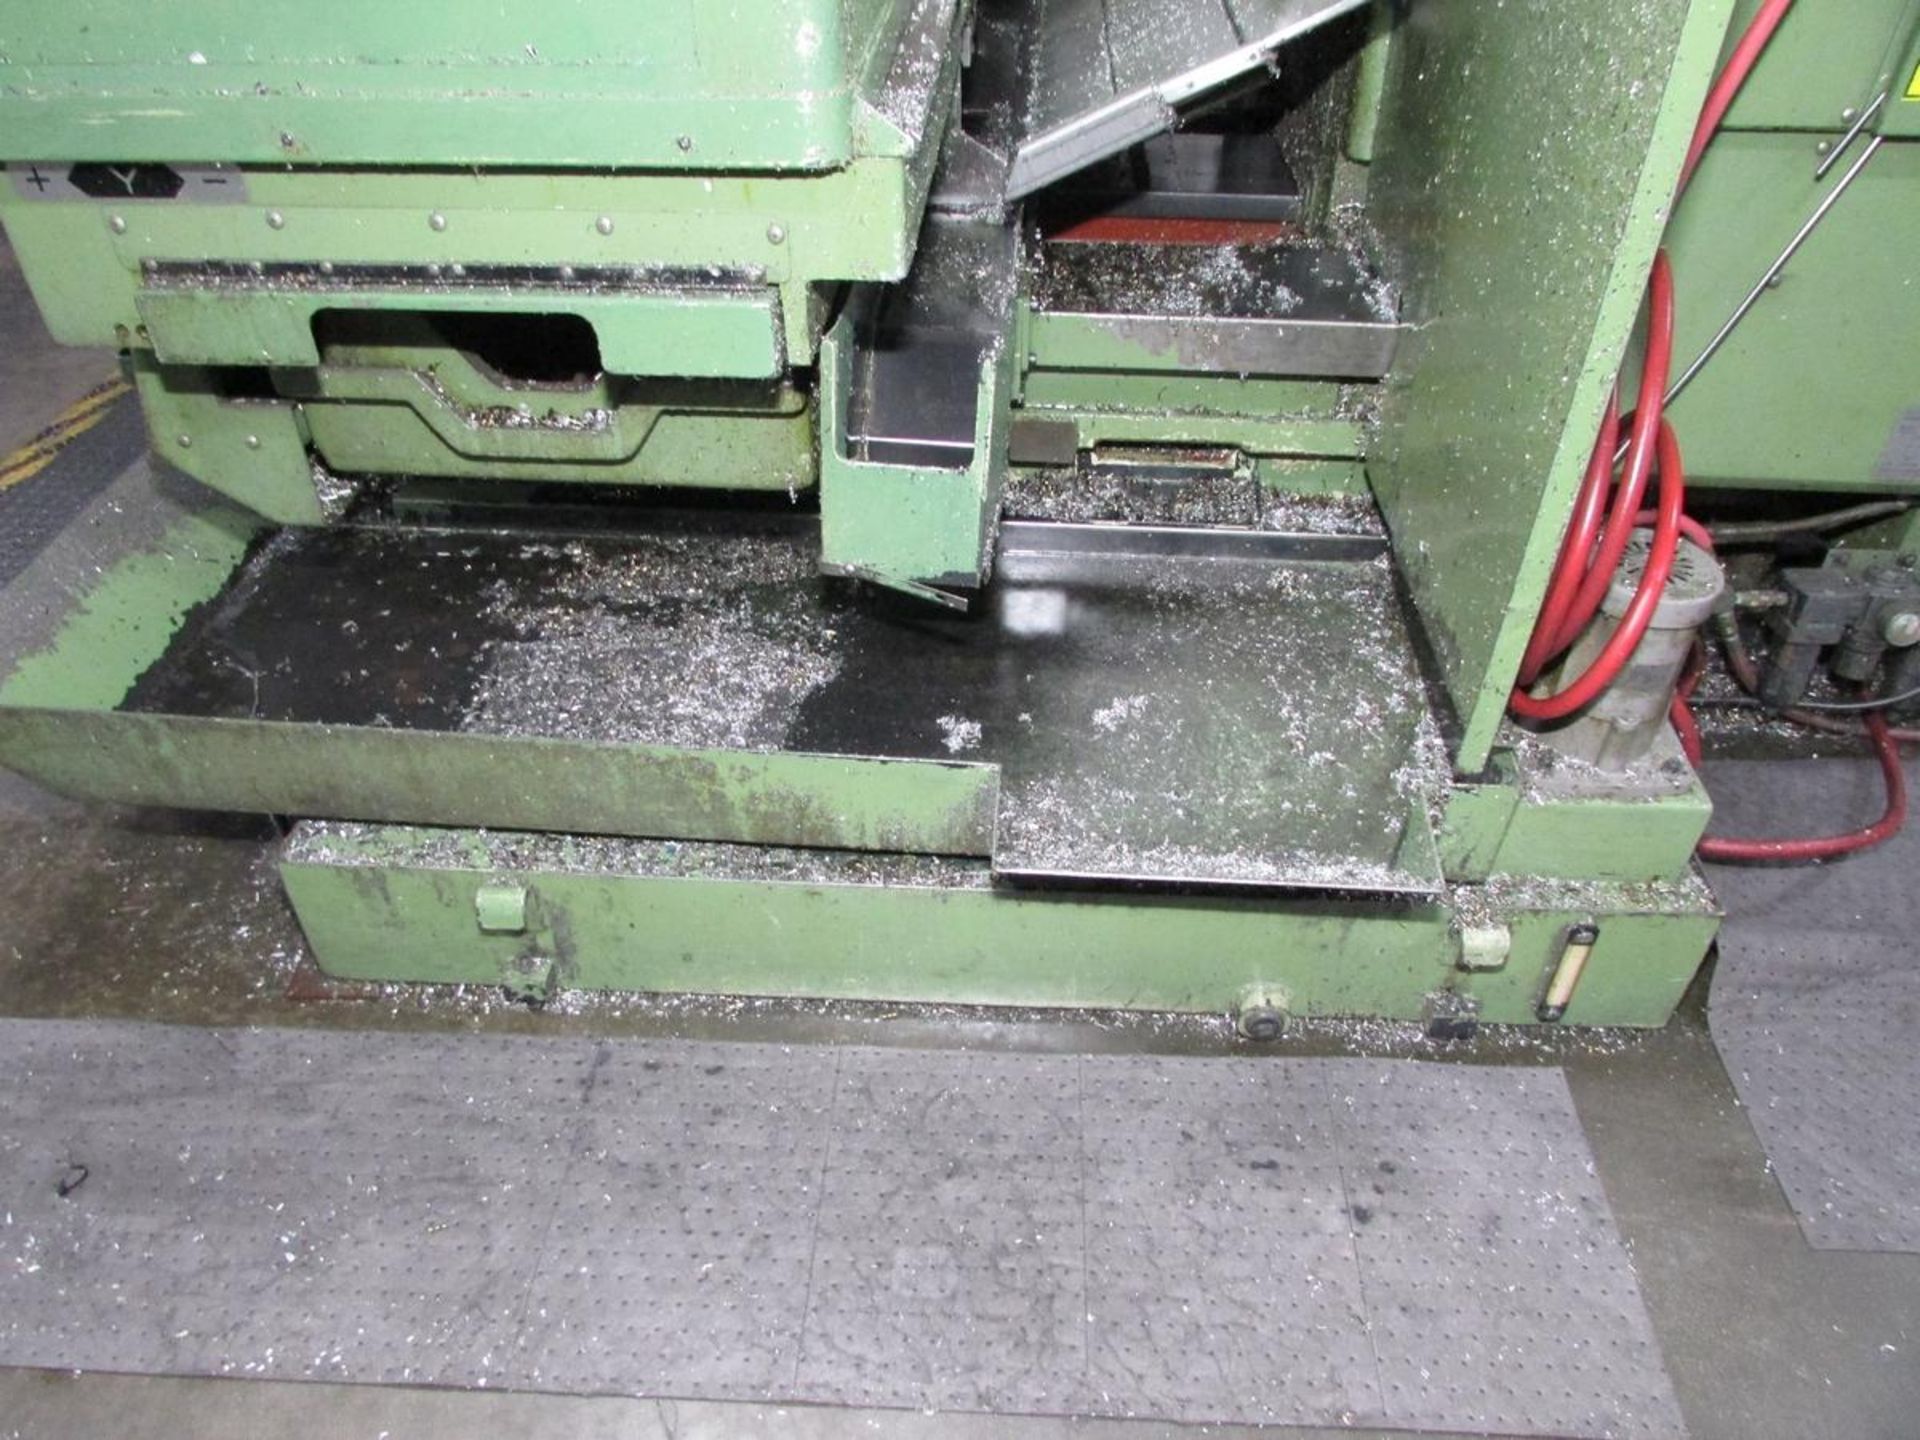 OKK MCV 520 3-Axis CNC Vertical Maching Center - Image 17 of 28